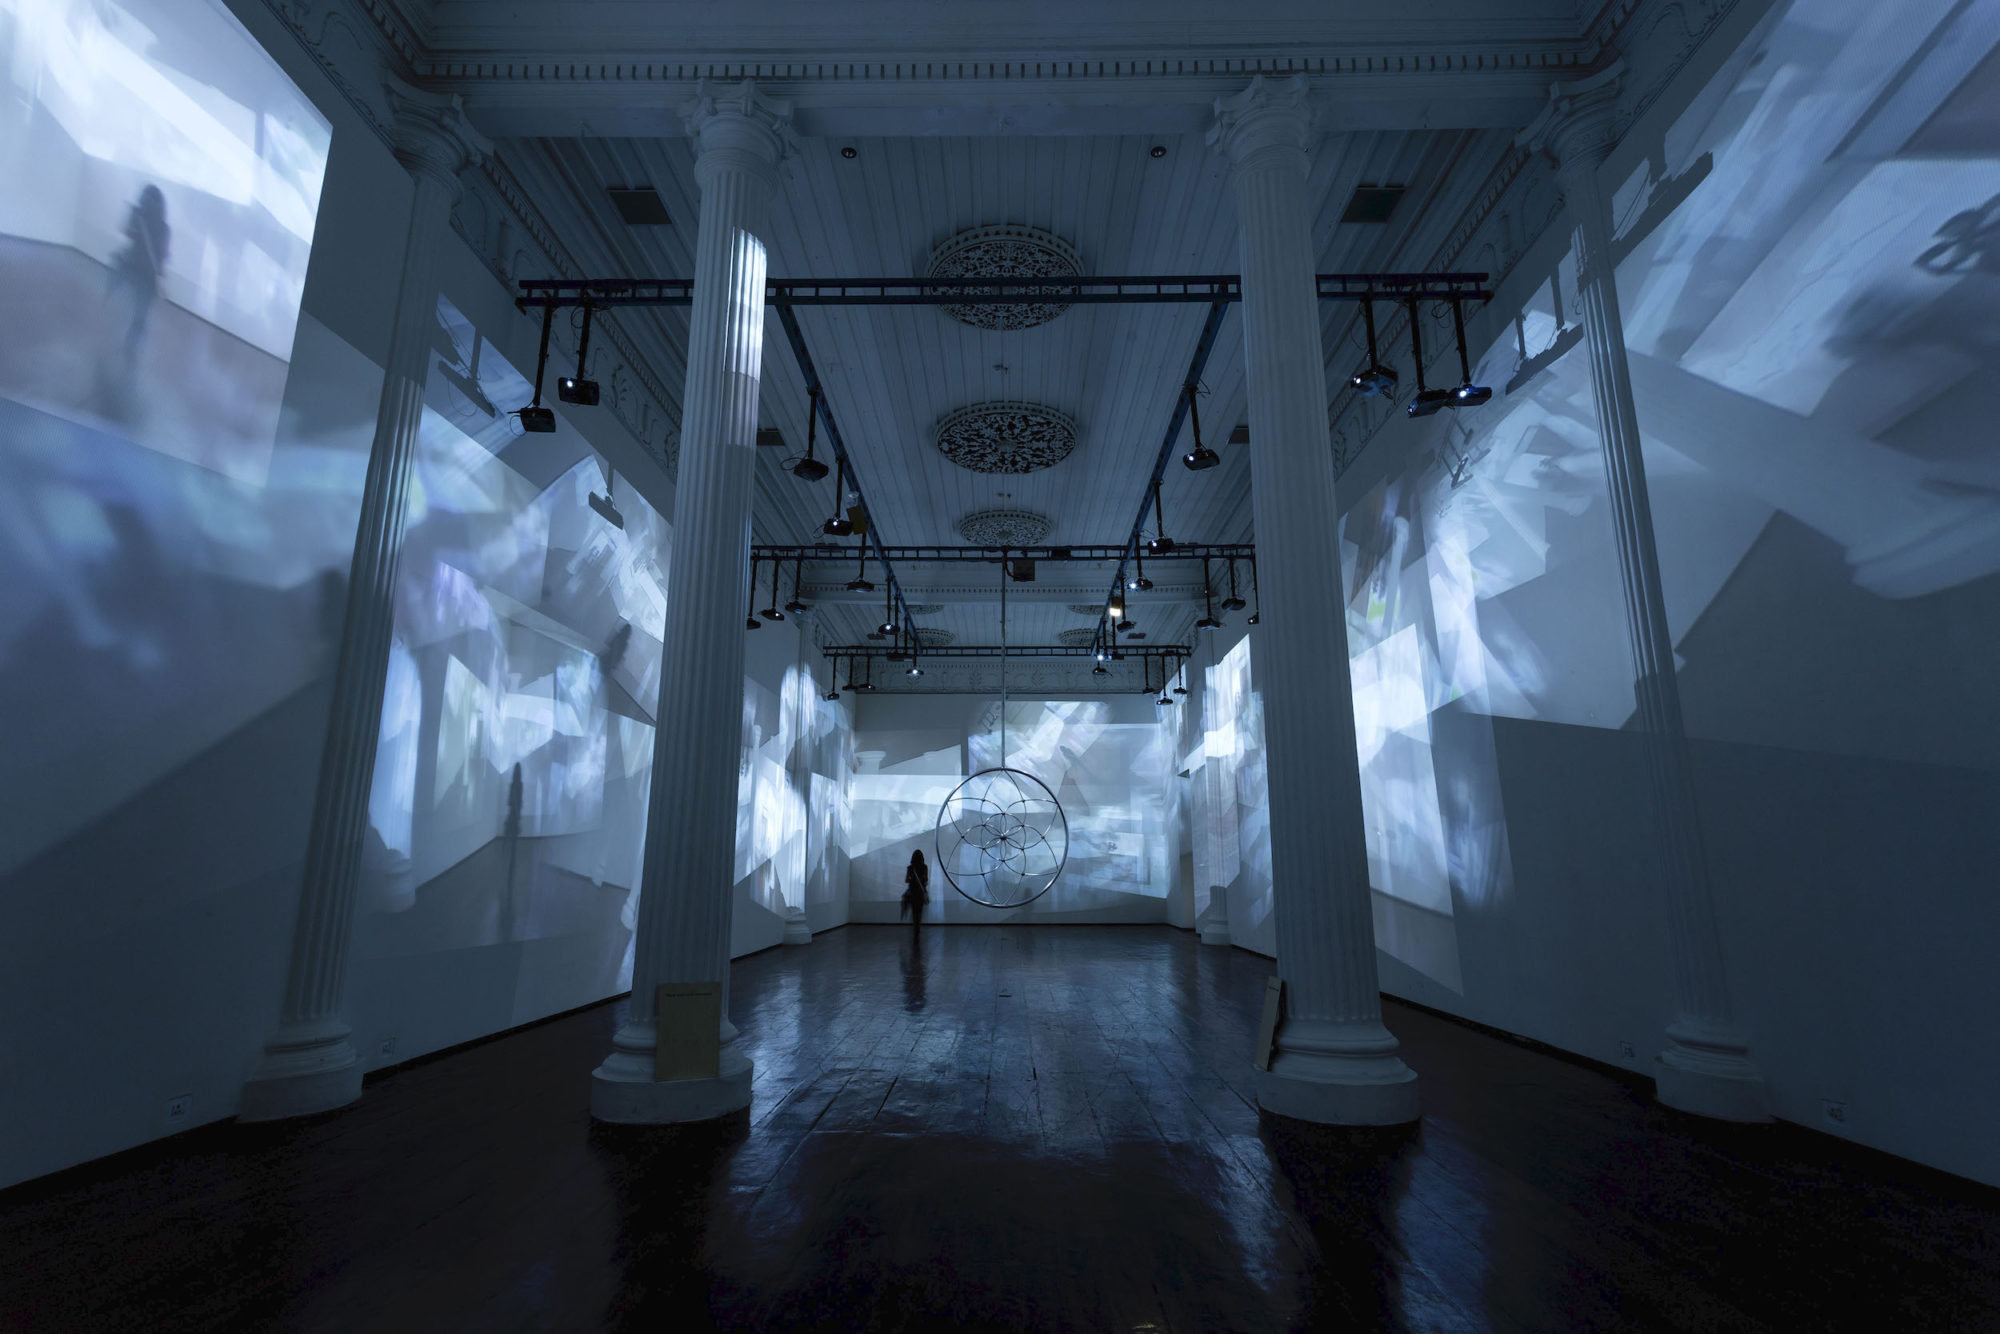 Gary Hill, ''Dream Stop,'' 2015. Mixed media with aluminum, 31 video cameras, 31 projectors and hardware. Dimensions variable. Installation view at Durbar Hall, Ernakulam.